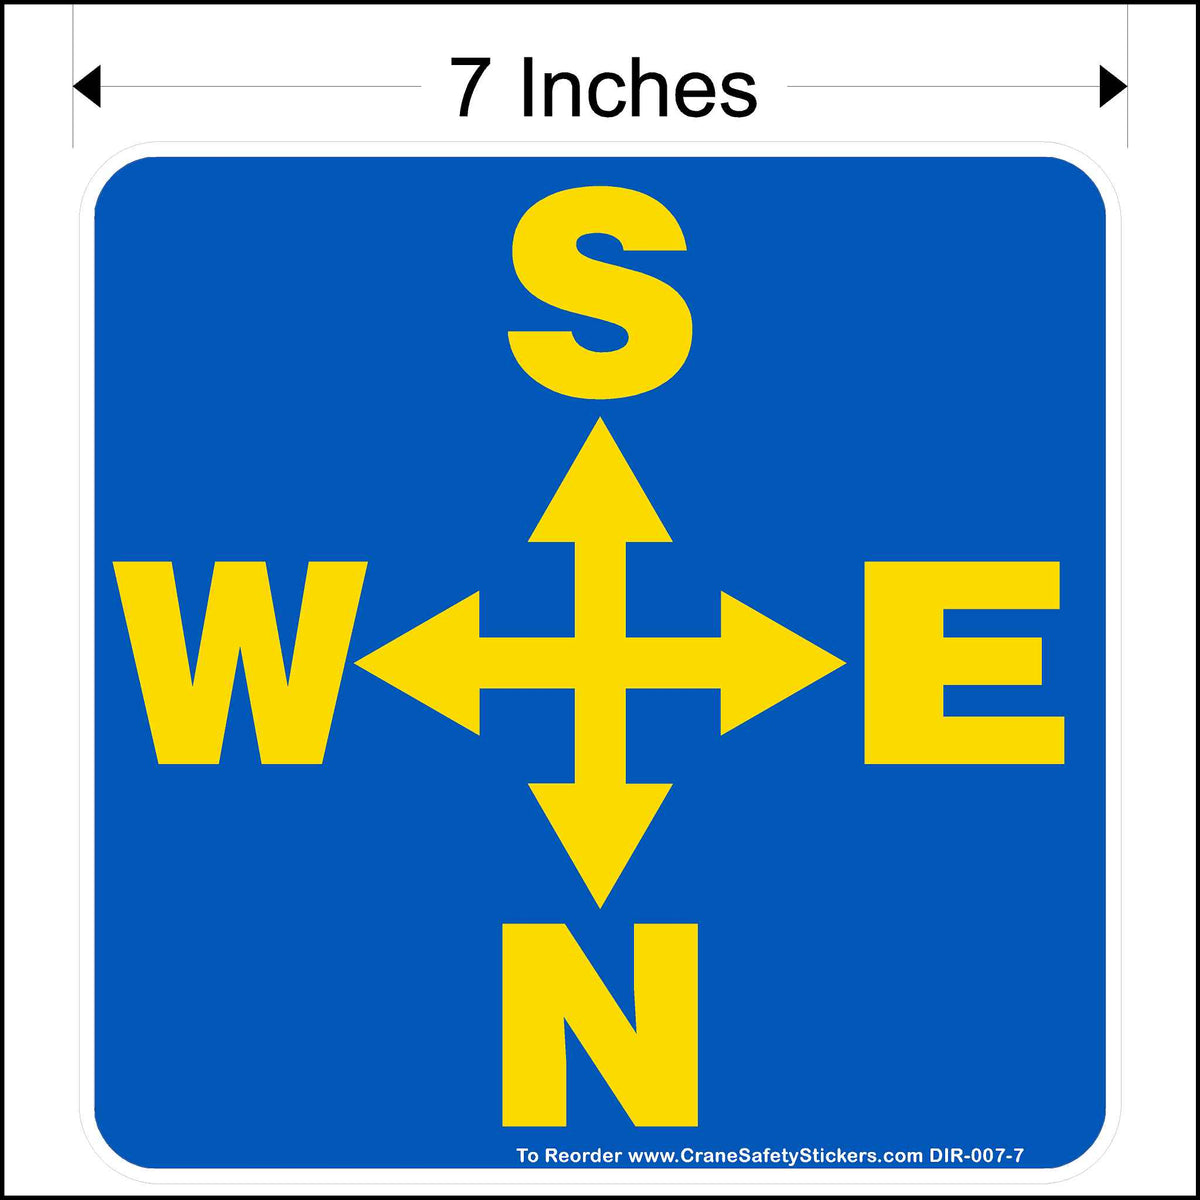 Seven inch overhead crane decal printed with yellow south, notrth, east, and west arrows on a blue background.